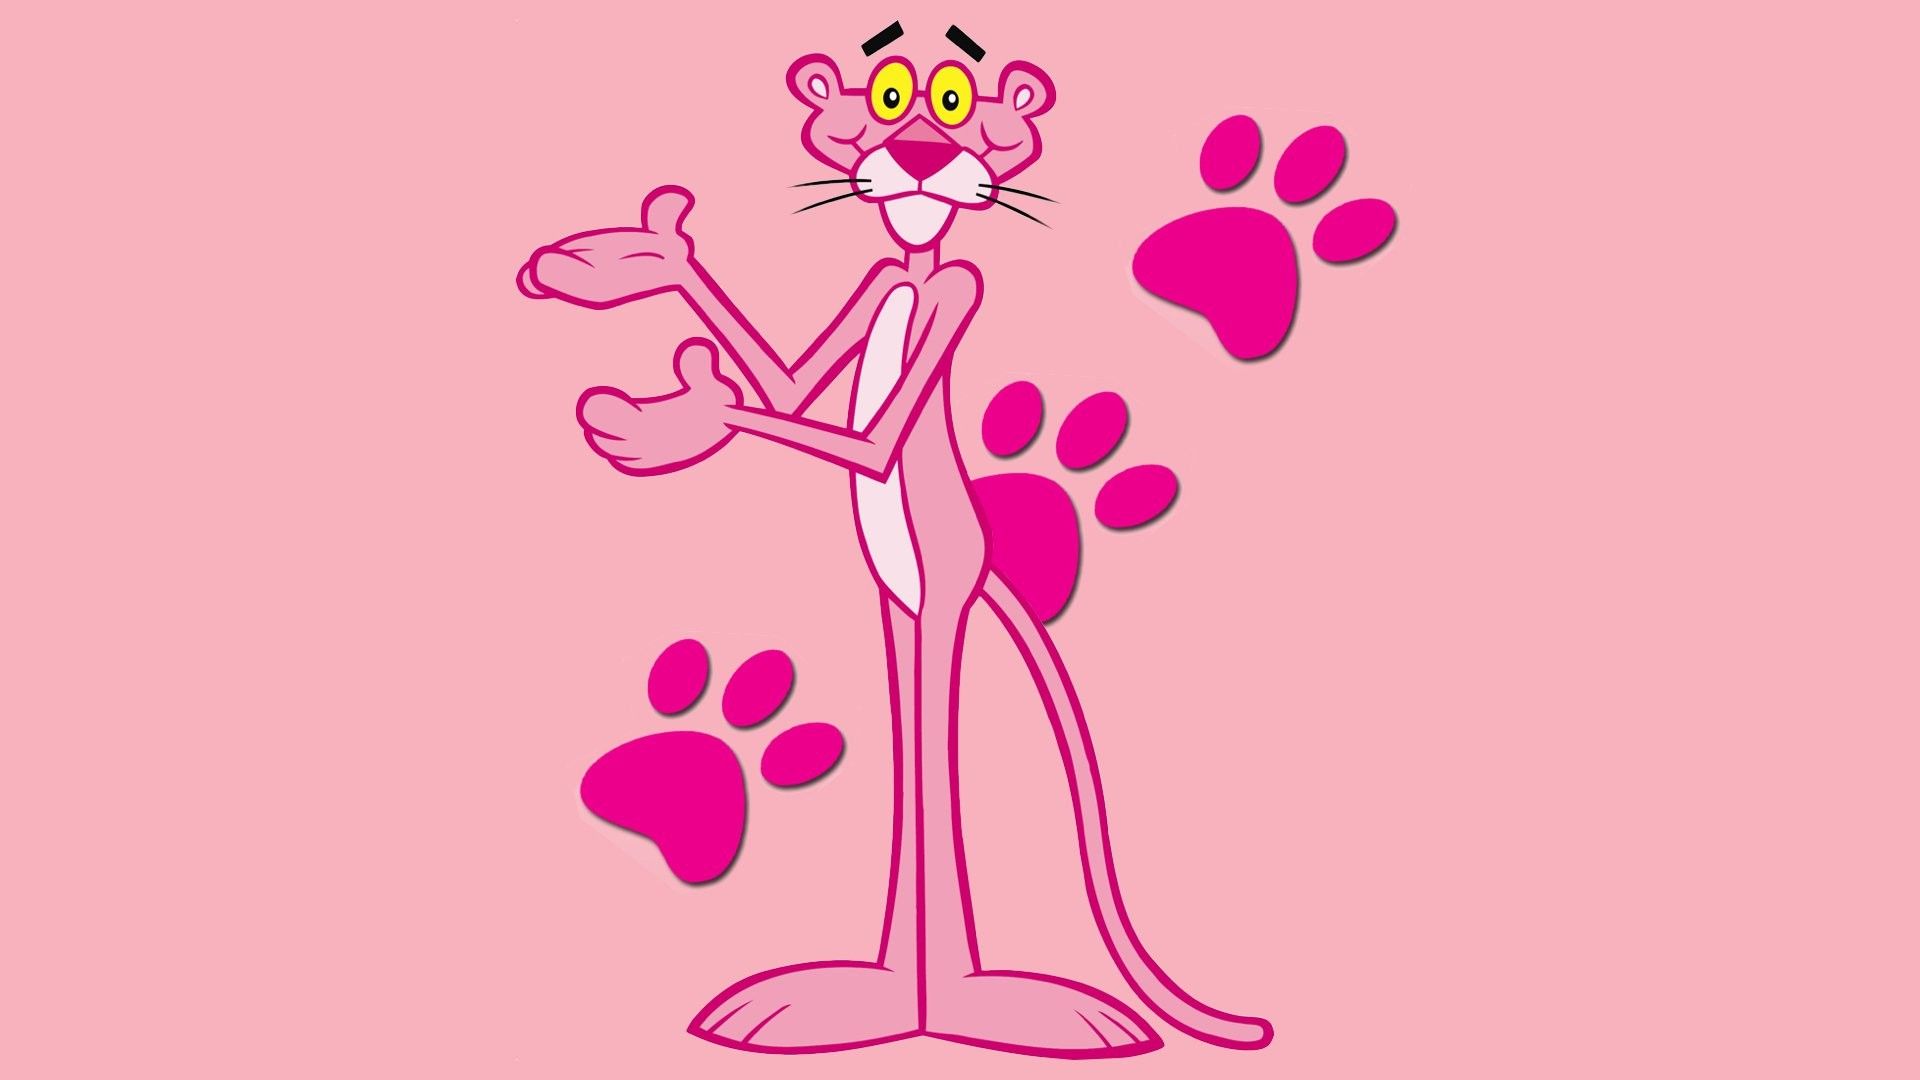 The Pink Panther Full HD Wallpaper